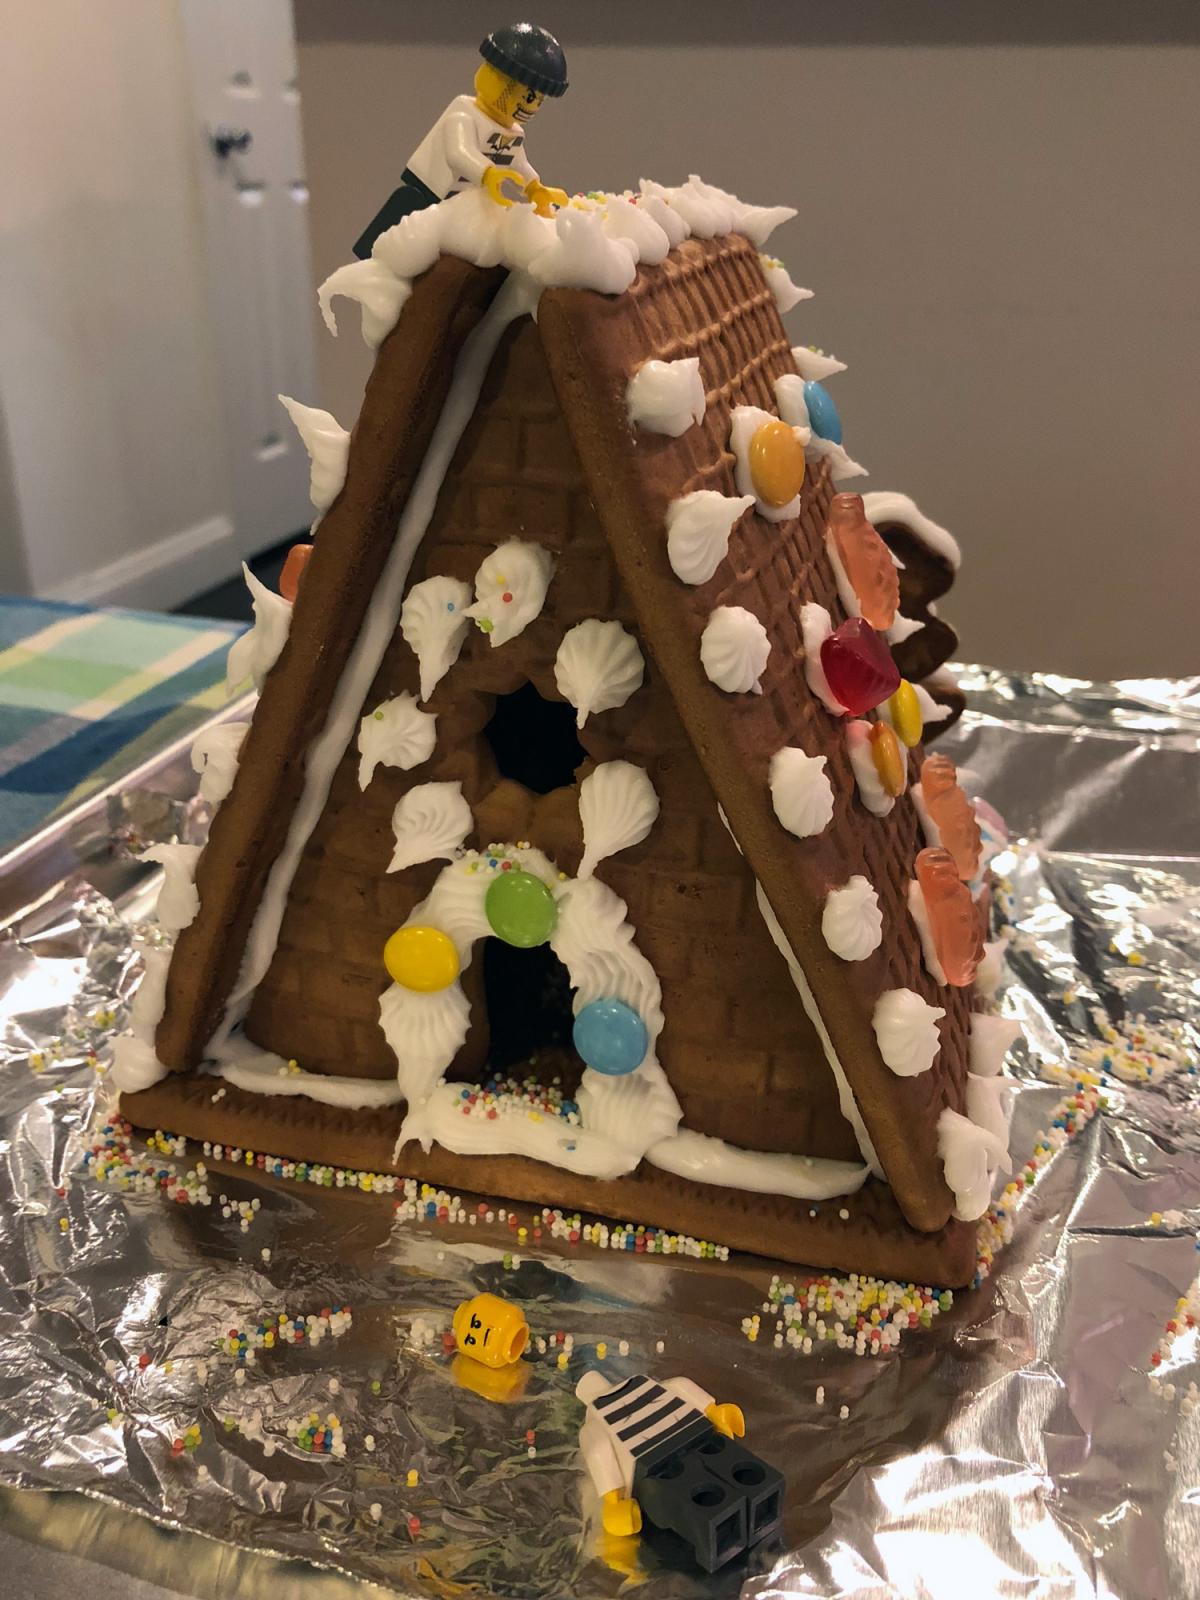 Gingerbread house with candy decorations and two LEGO figures.